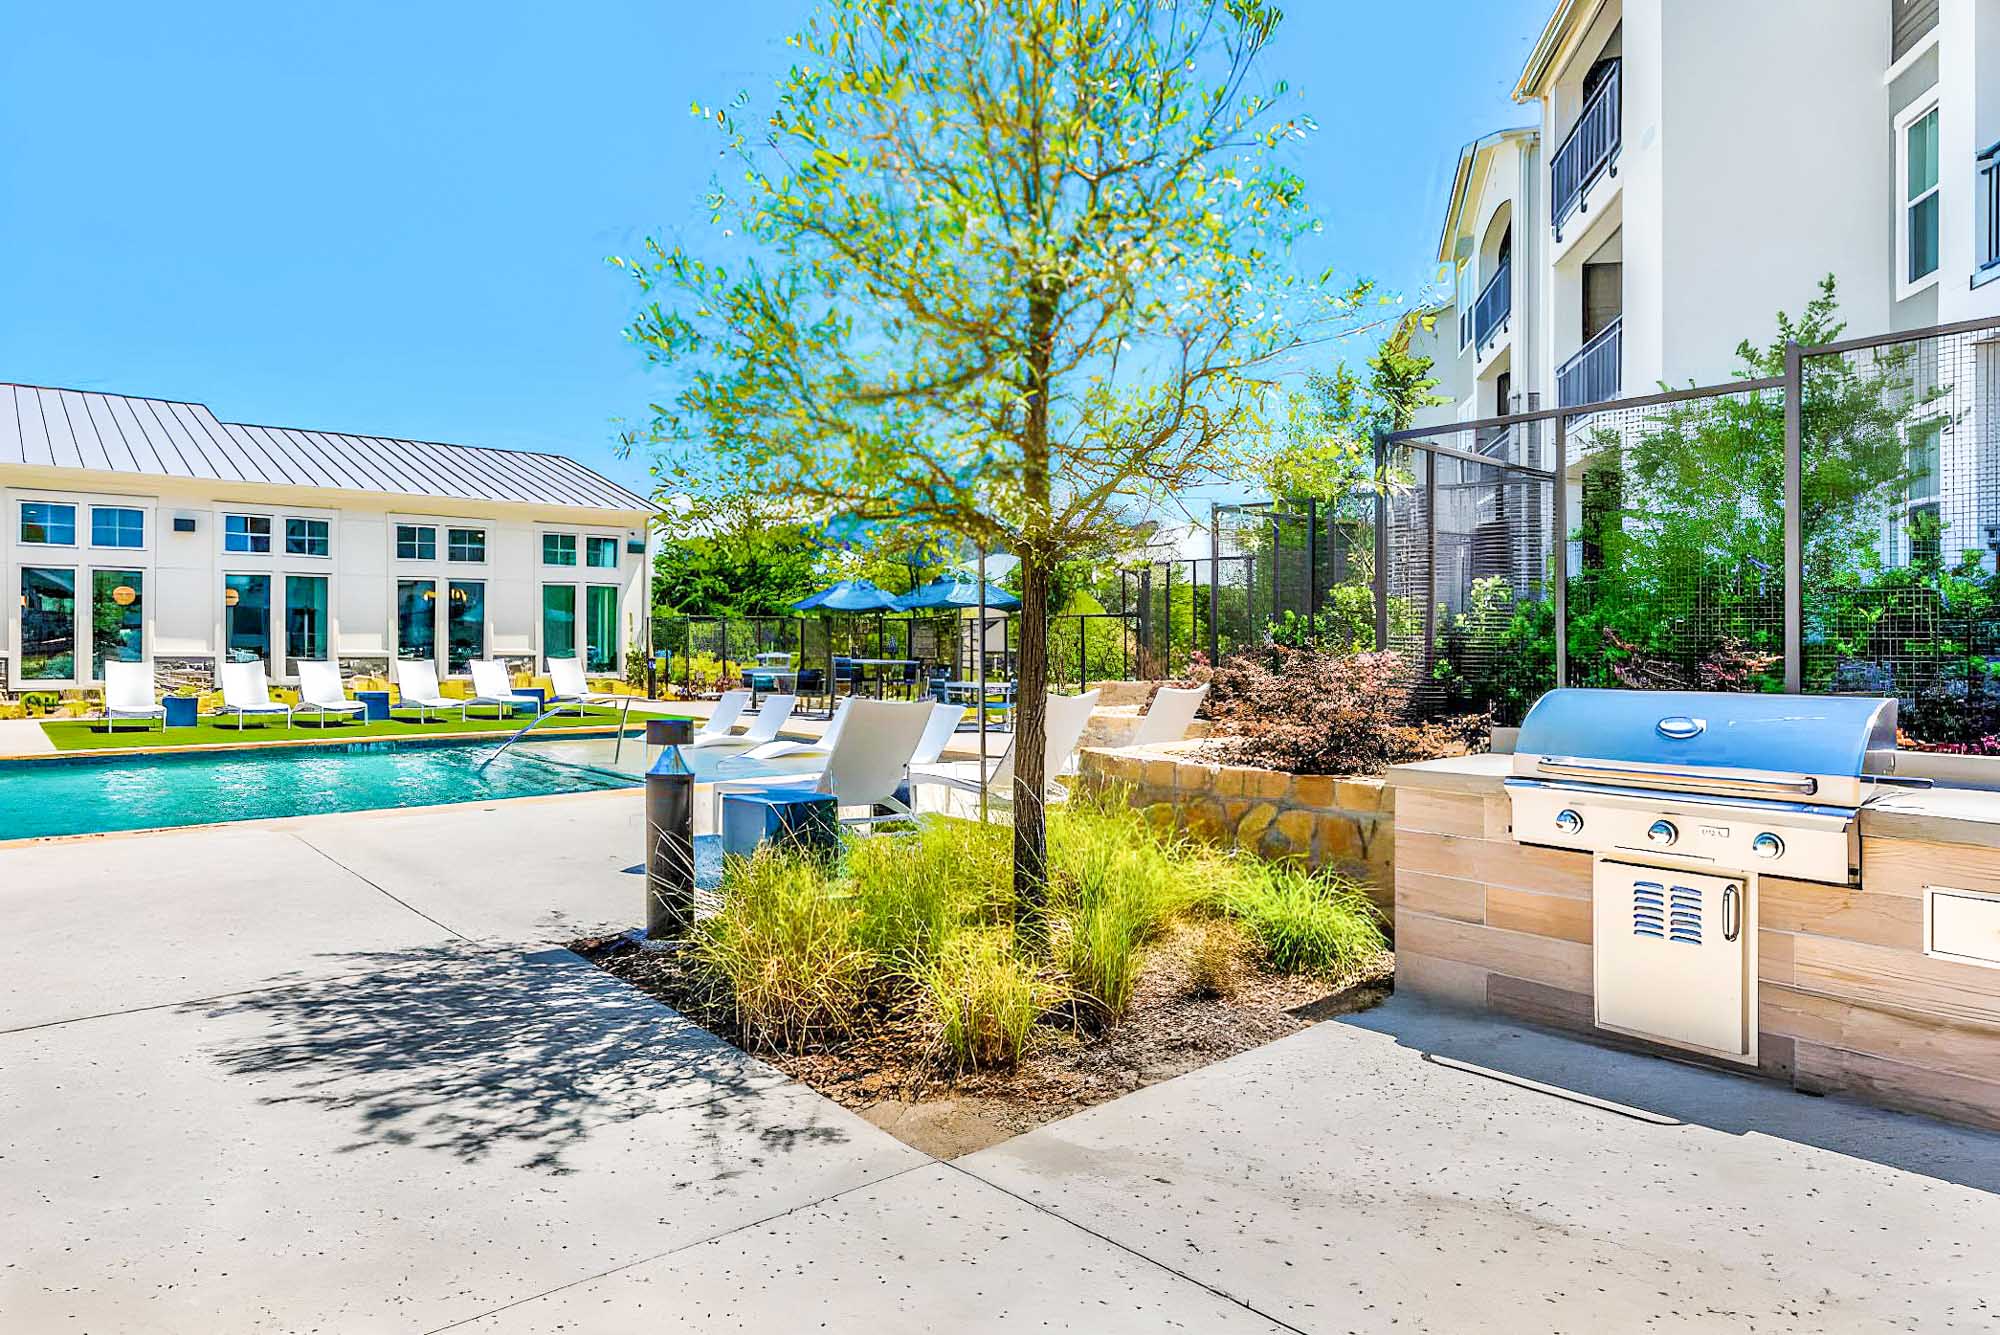 The outdoor grills at Embree Hill apartments in Dallas, TX.